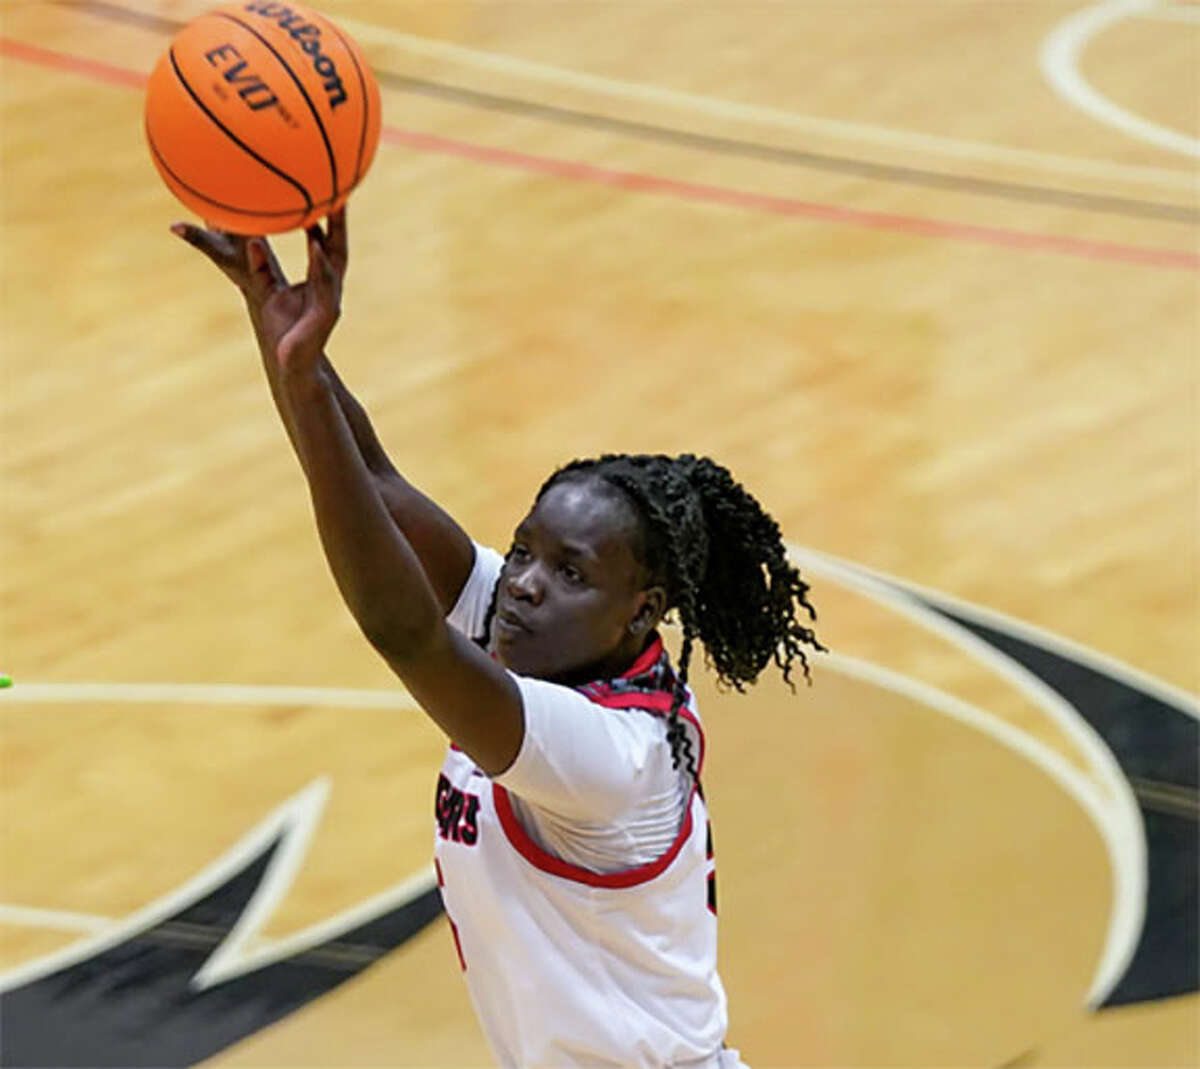 SIUE's Ajulu Thatha scored a team-high 13 points in Tuesday's loss at Washington.